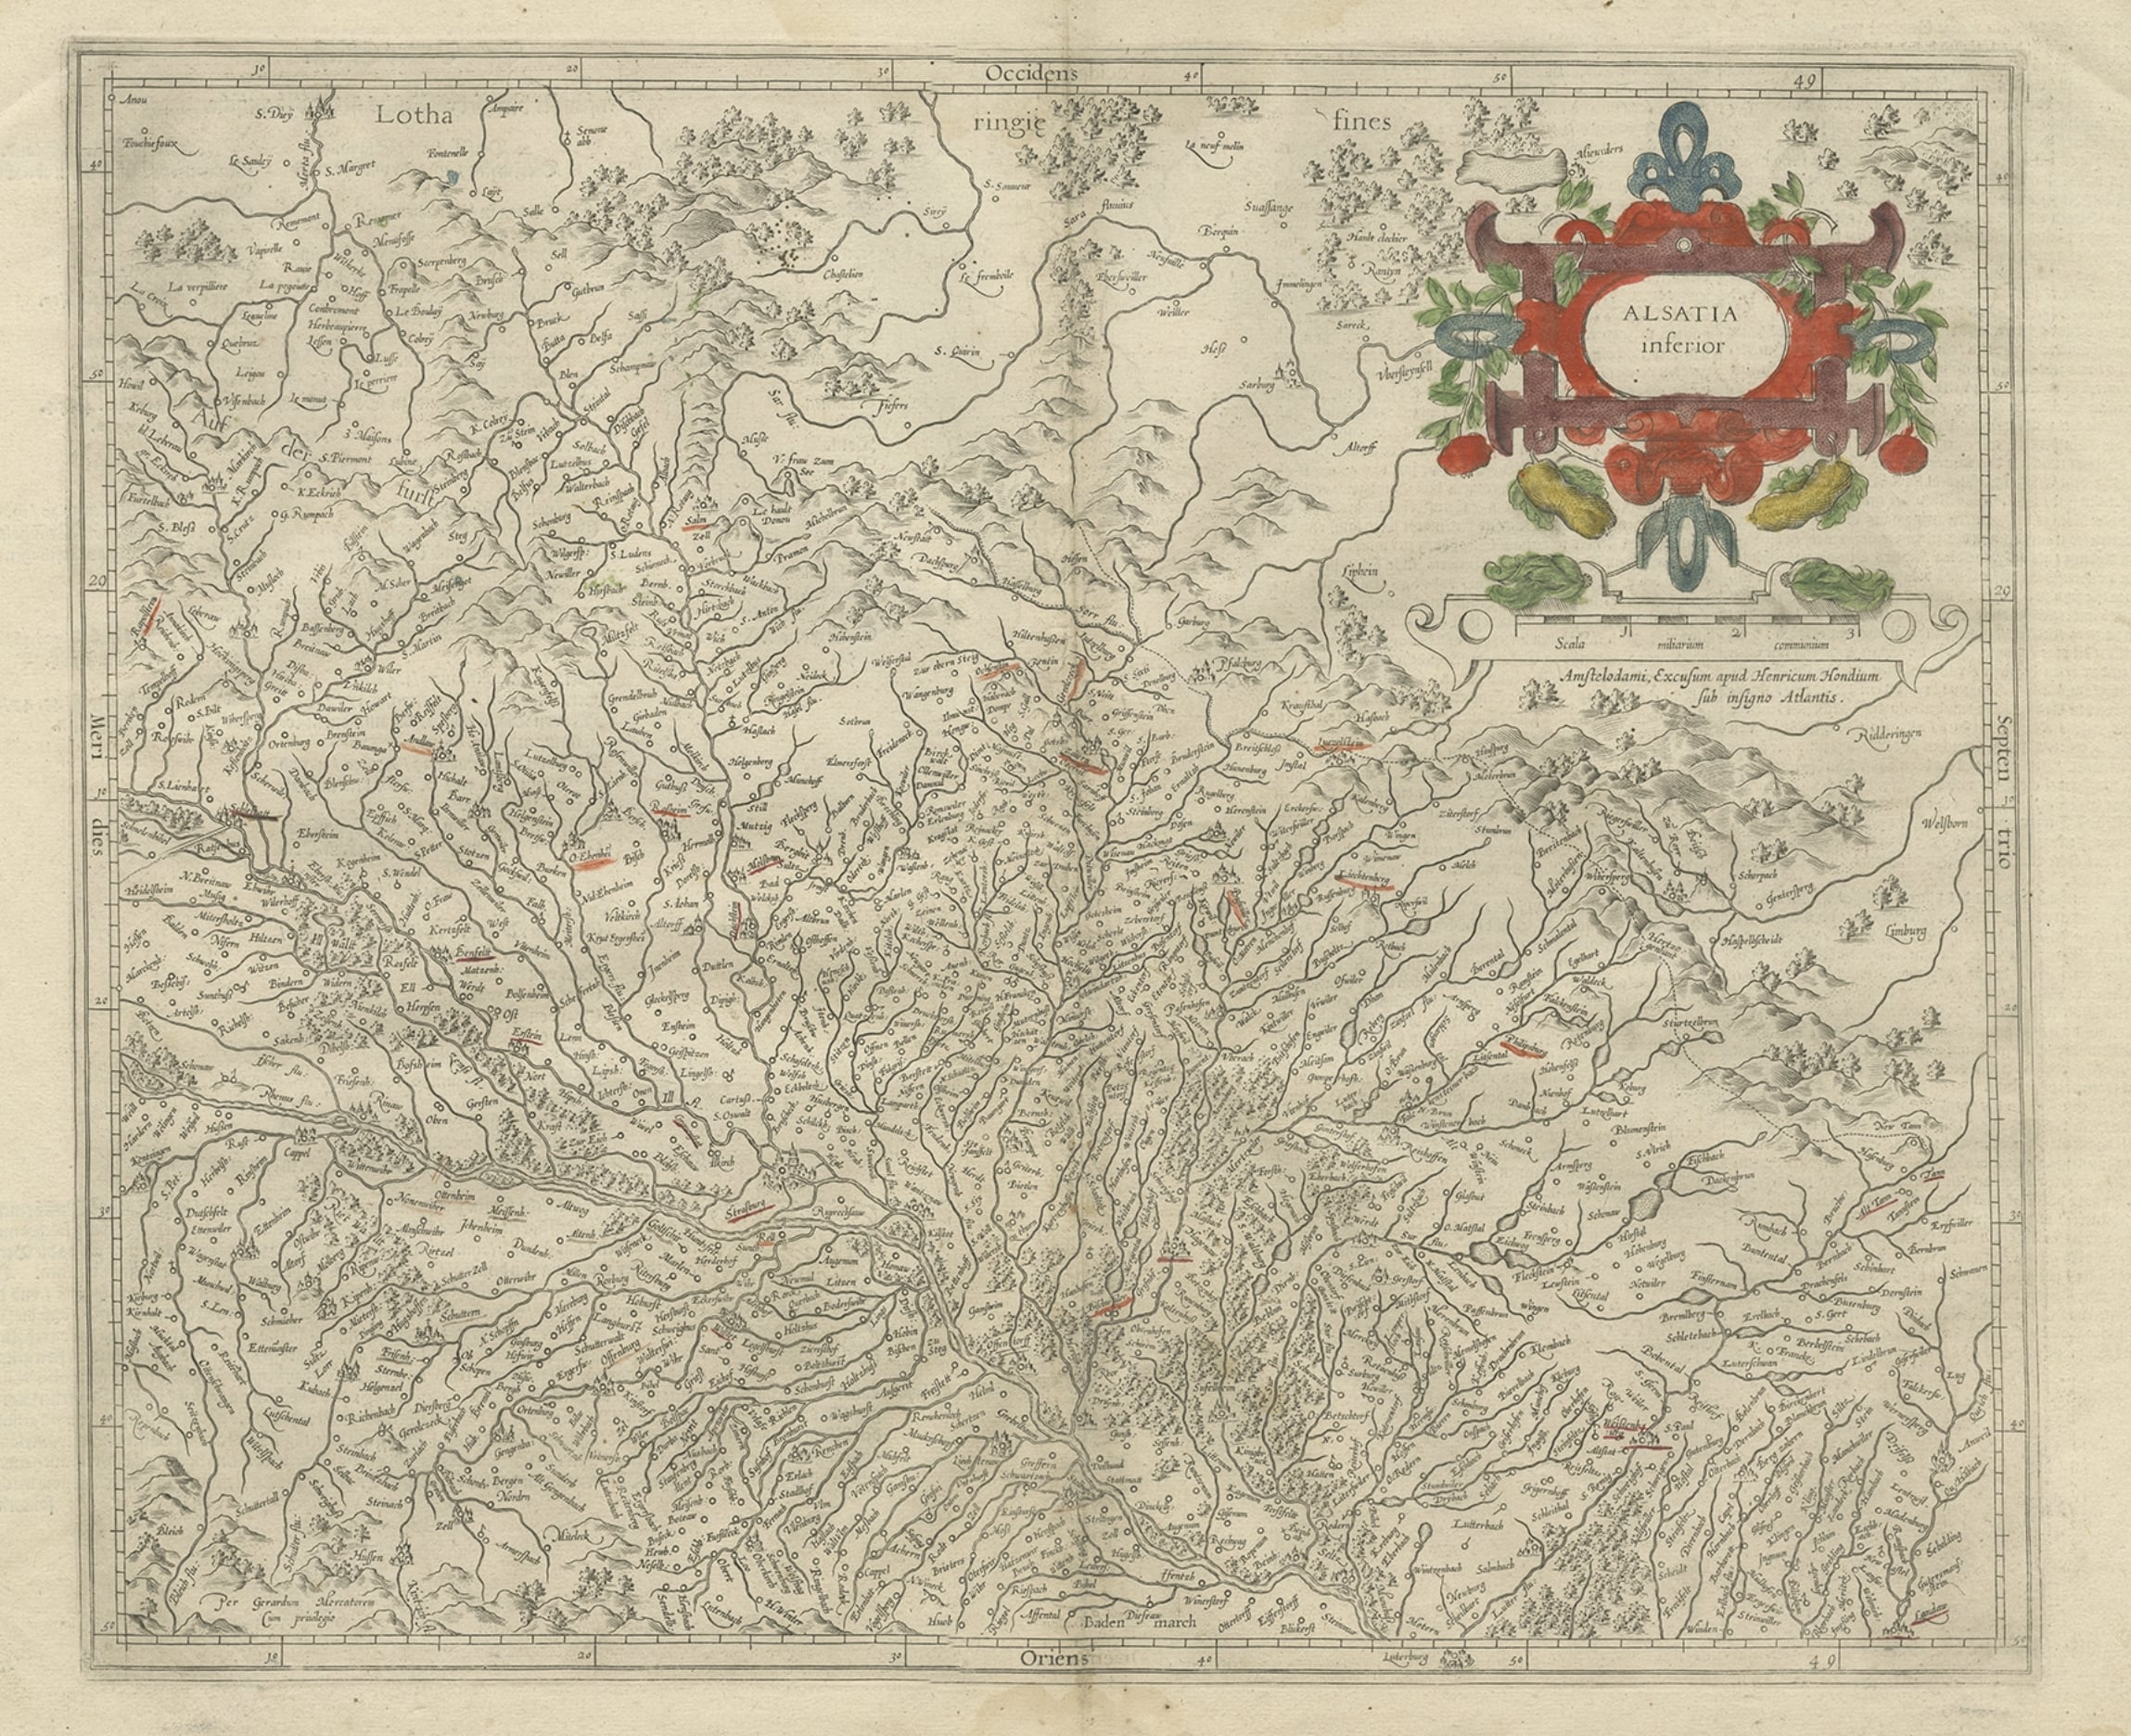 Antique Map of the Lower Alsace Region of France by Mapmaker Hondius, c.1630